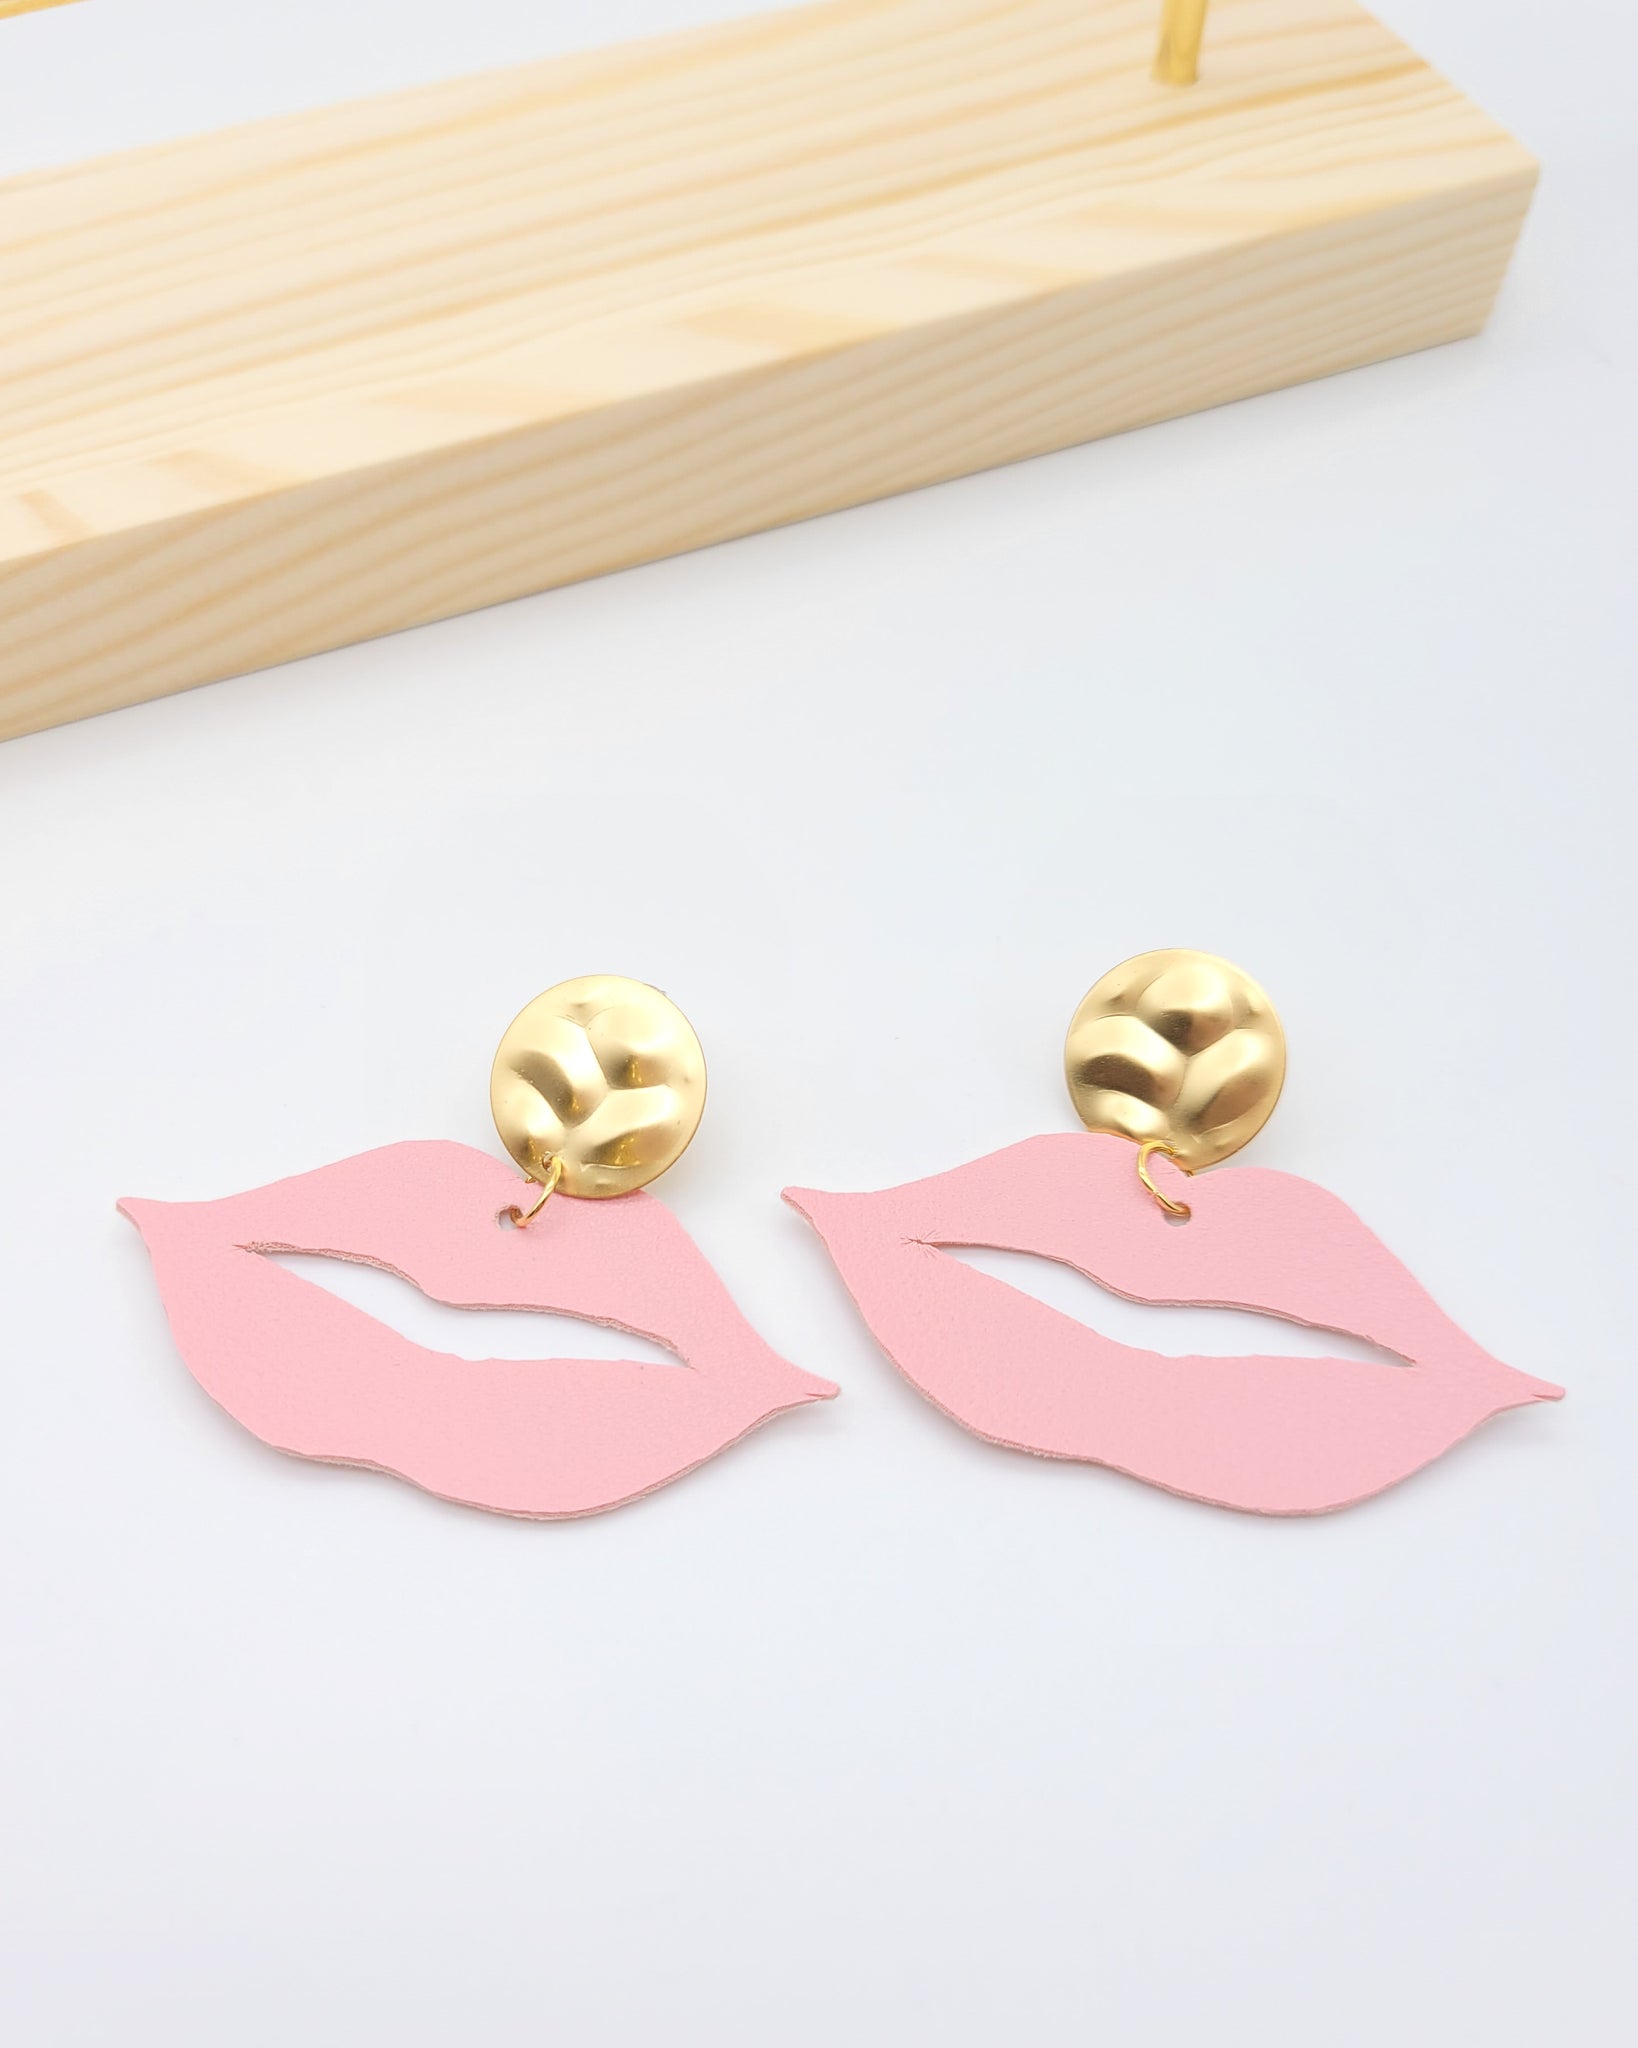 Blush Pink Lip Earrings on Gold Posts